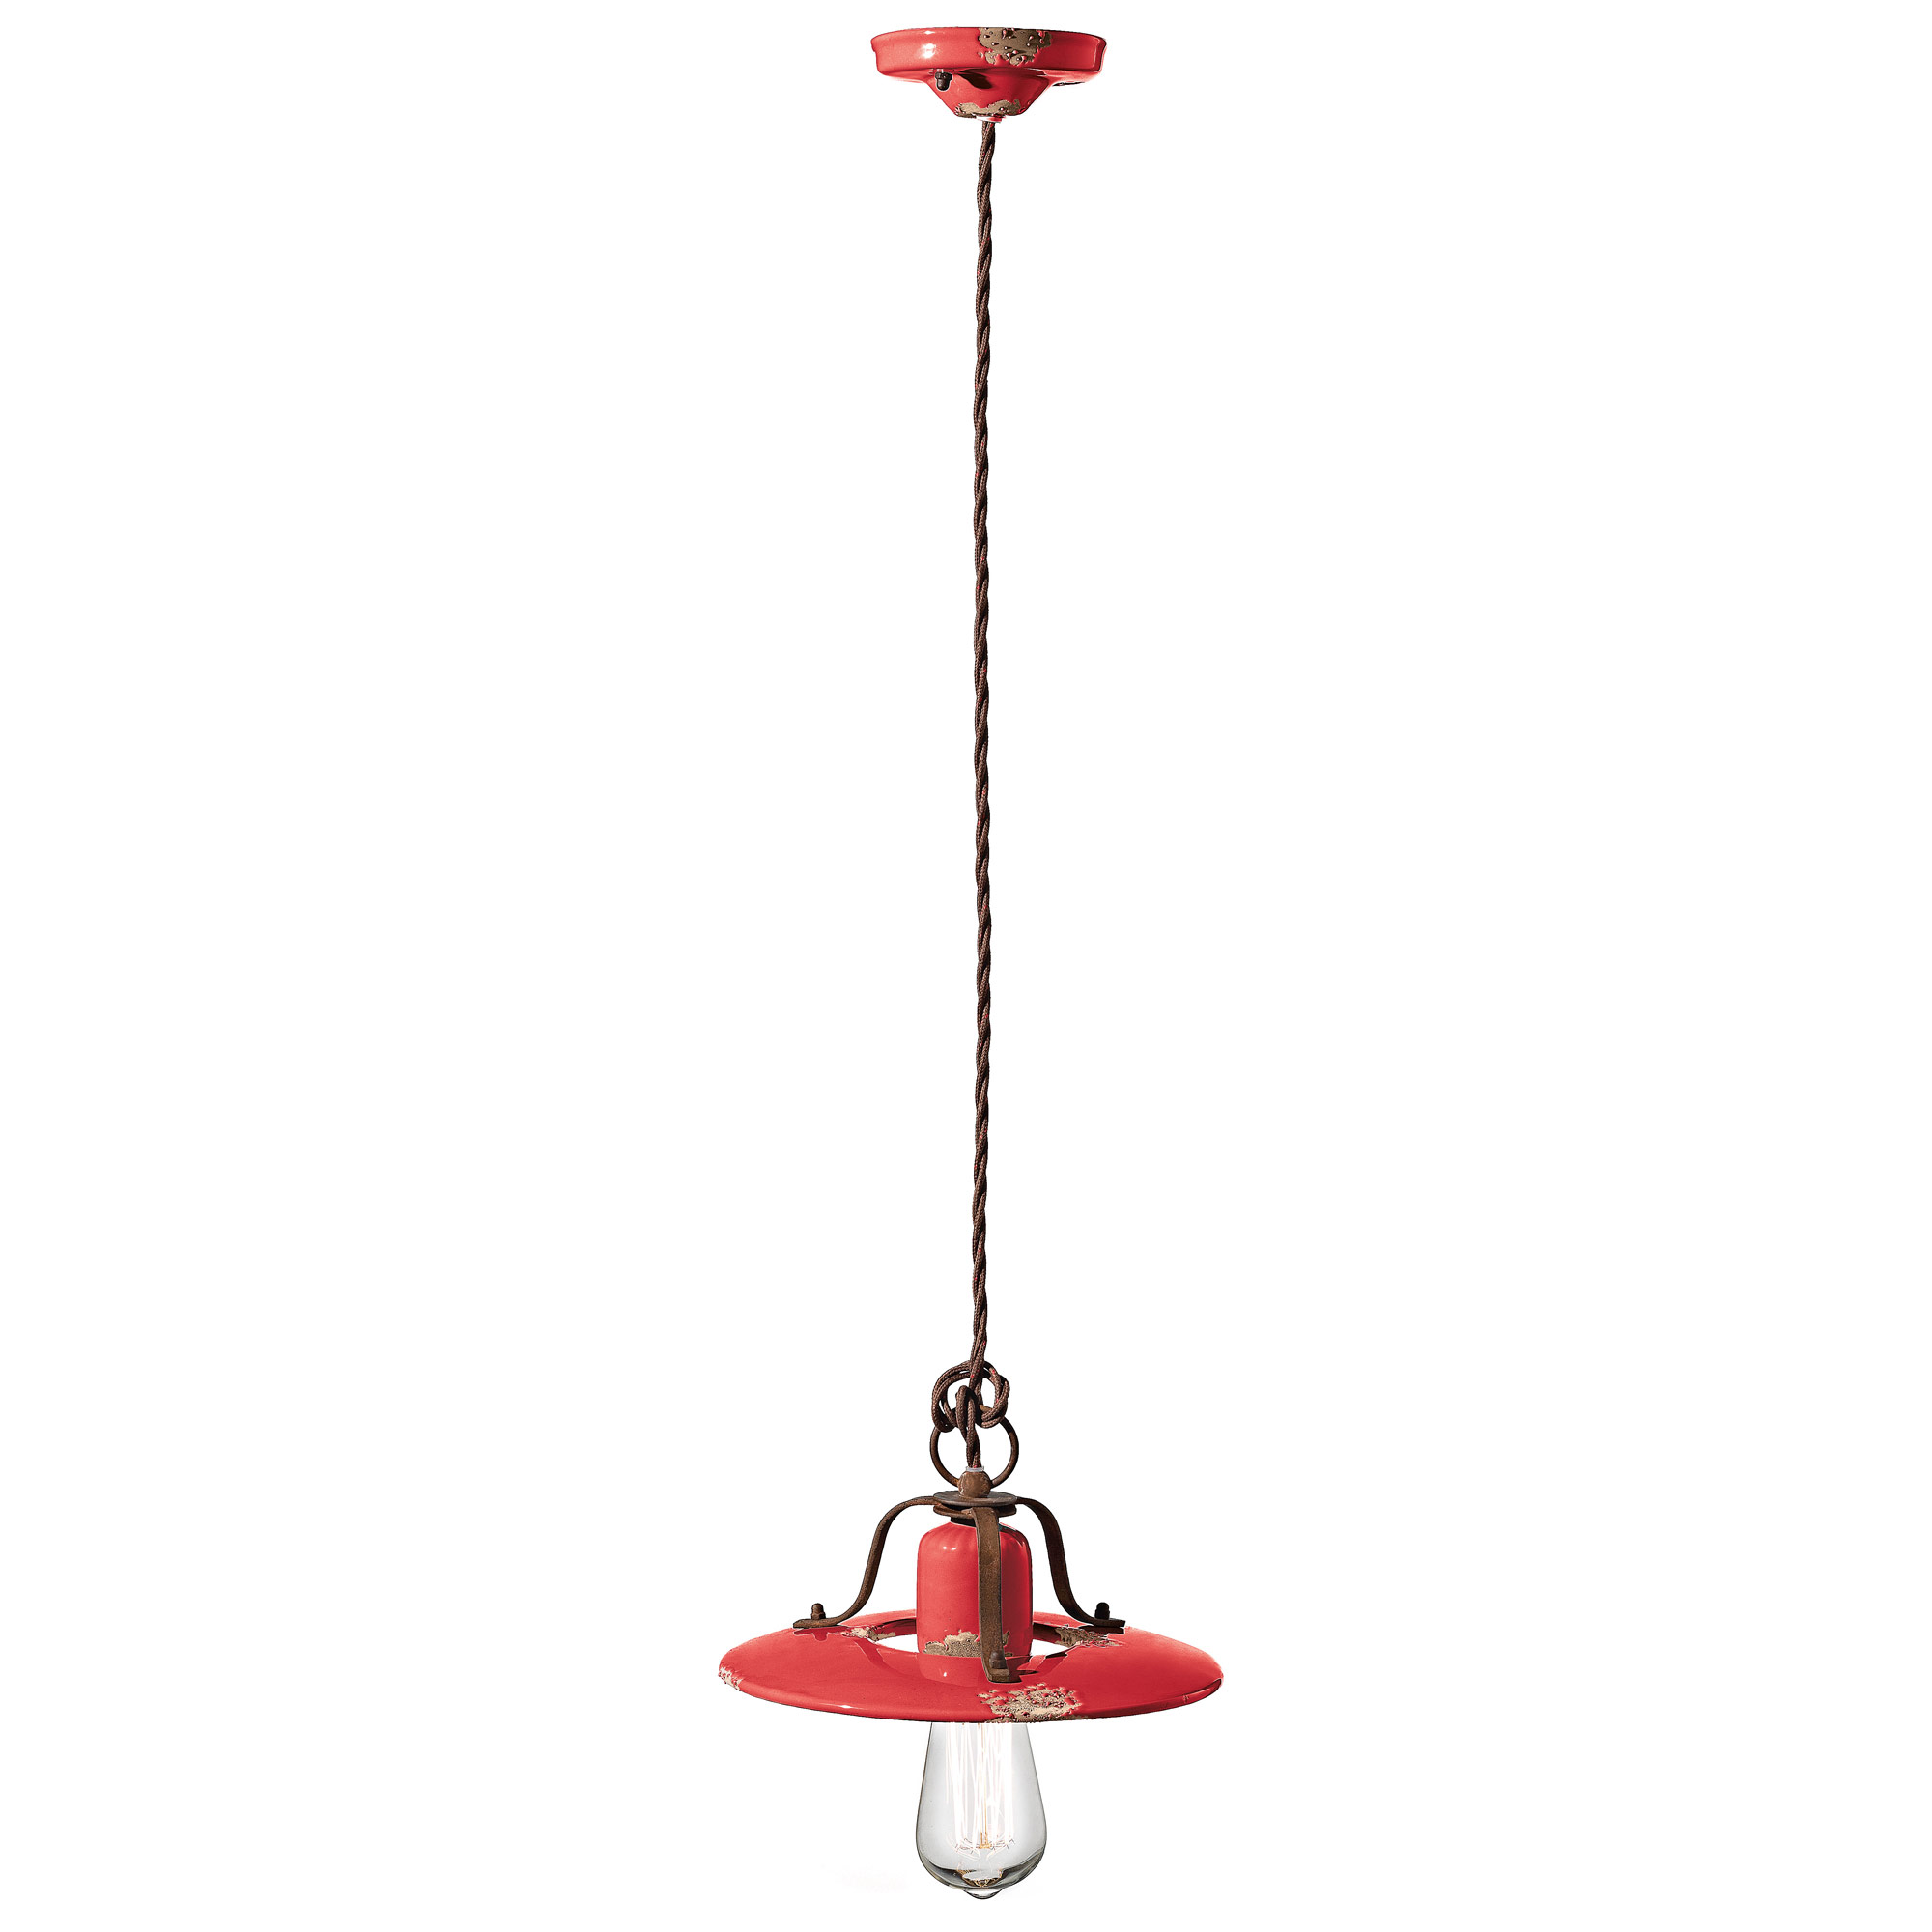 Country Pendant by Ferroluce | C1441-VT-RED